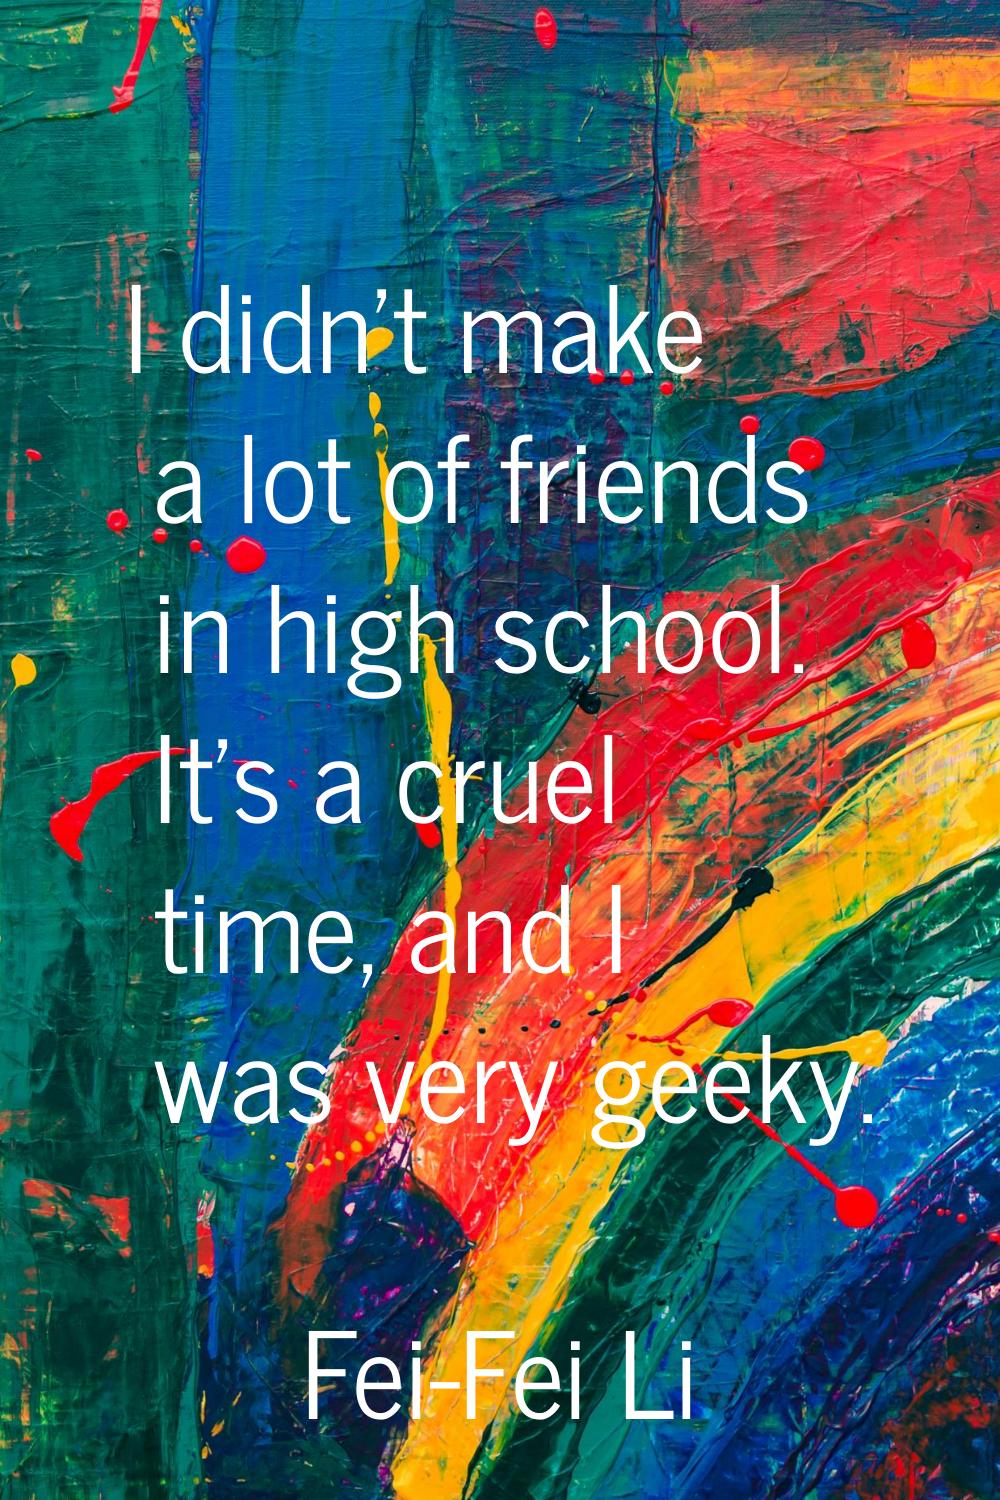 I didn't make a lot of friends in high school. It's a cruel time, and I was very geeky.